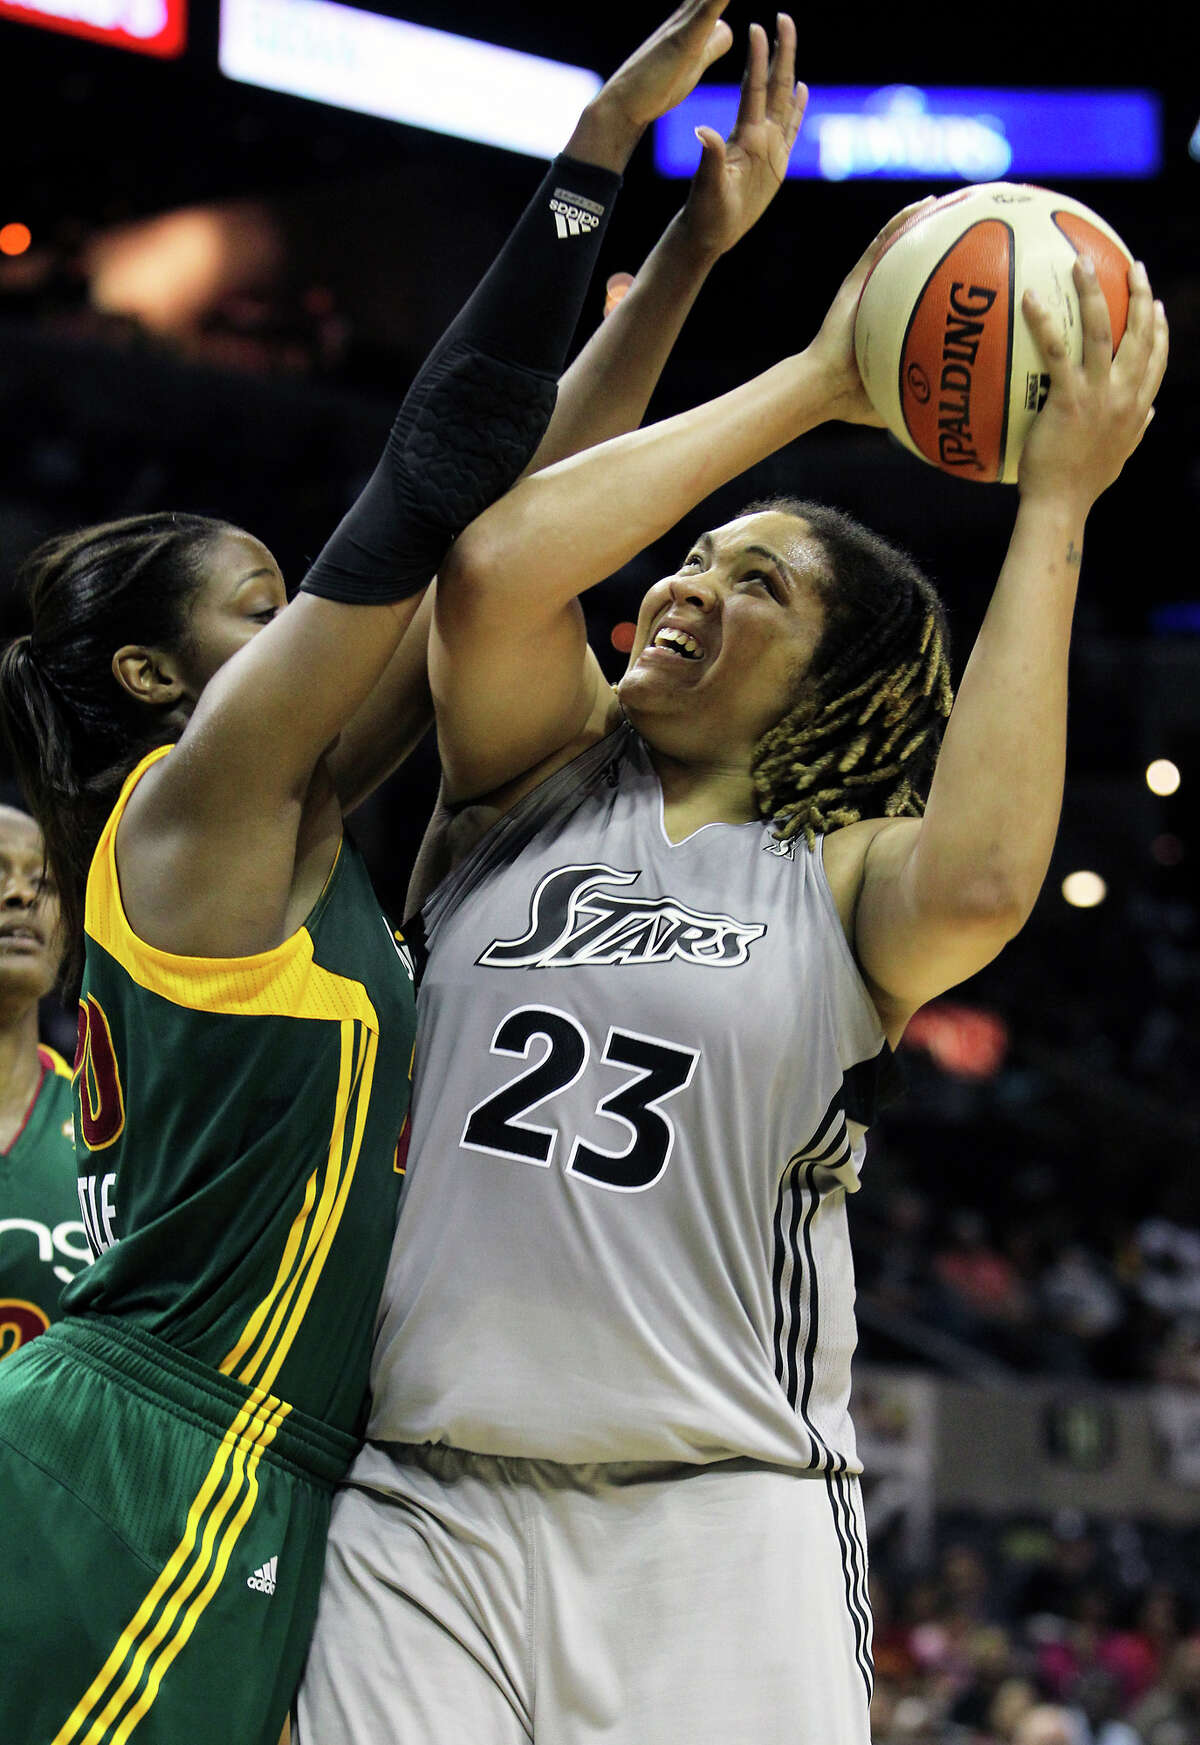 Stars forward Danielle Adams gets tough points in the final minutes against Camille Little as the San Antonio Silver Stars play the Seattle Storm at the AT&T Center on July 14, 2011. Tom Reel/Staff